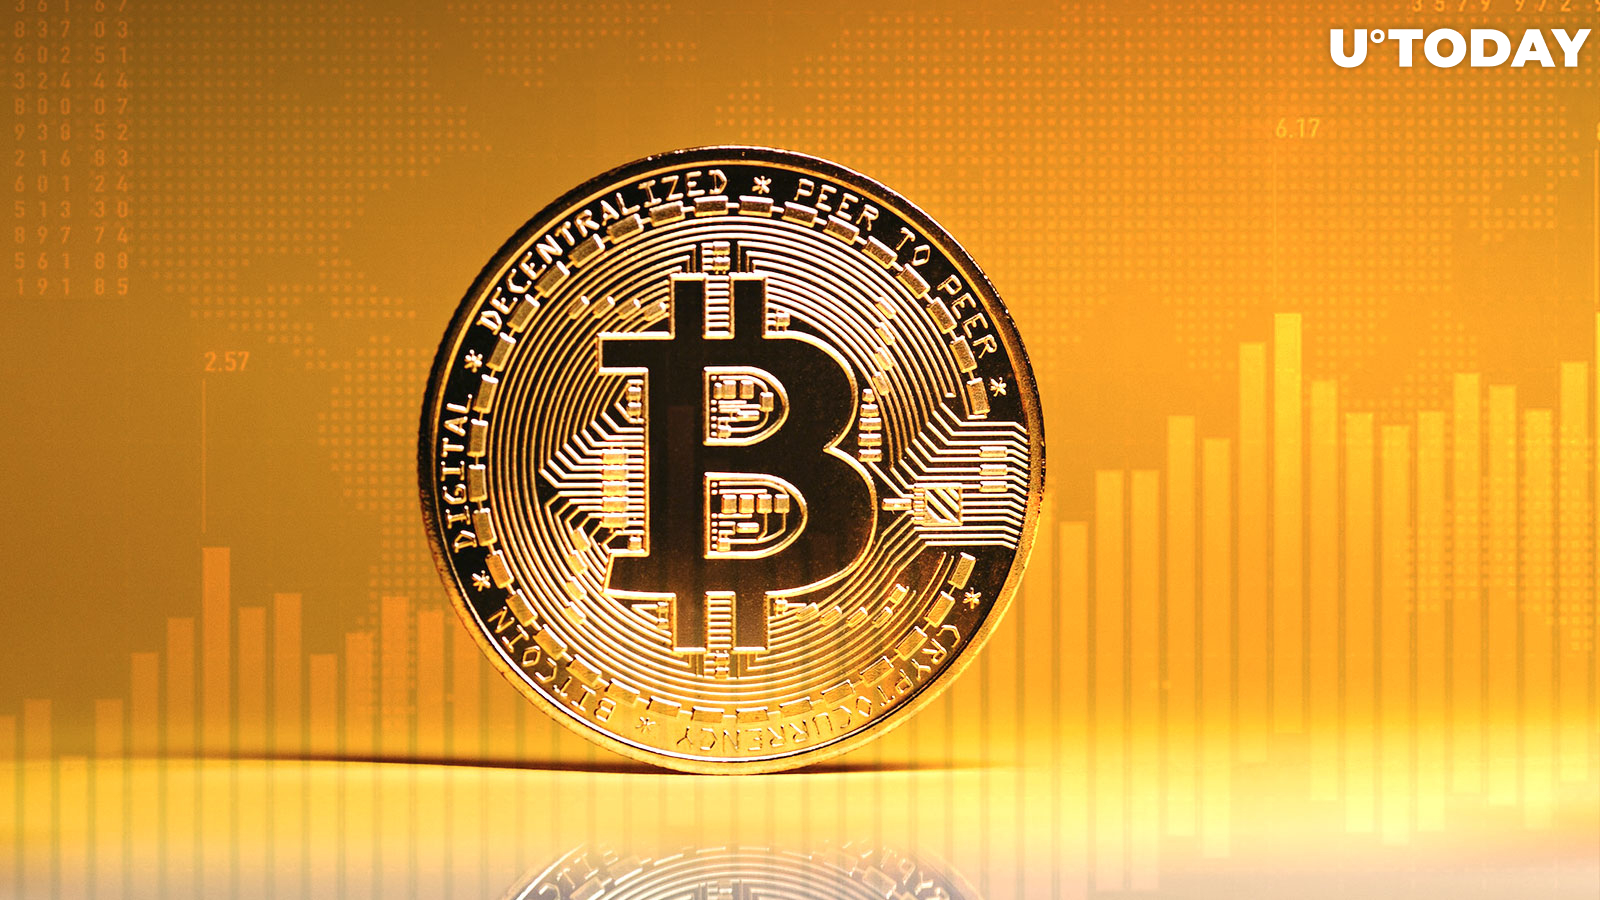 Bitcoin (BTC) Price Suddenly Jumps to Highest Level Since September 